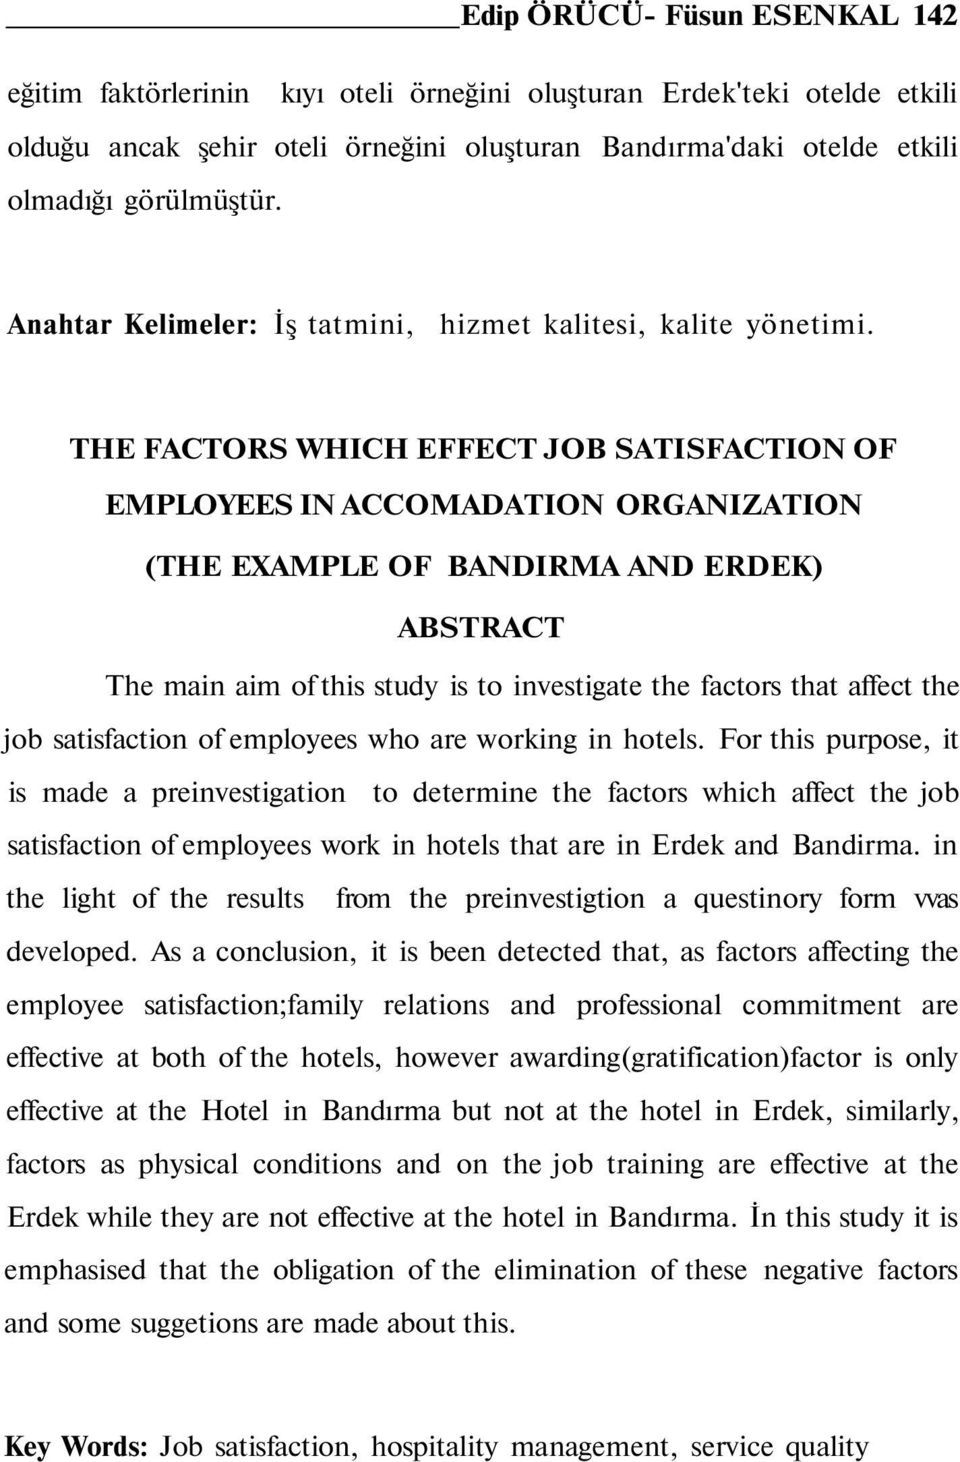 THE FACTORS WHICH EFFECT JOB SATISFACTION OF EMPLOYEES IN ACCOMADATION ORGANIZATION (THE EXAMPLE OF BANDIRMA AND ERDEK) ABSTRACT The main aim of this study is to investigate the factors that affect